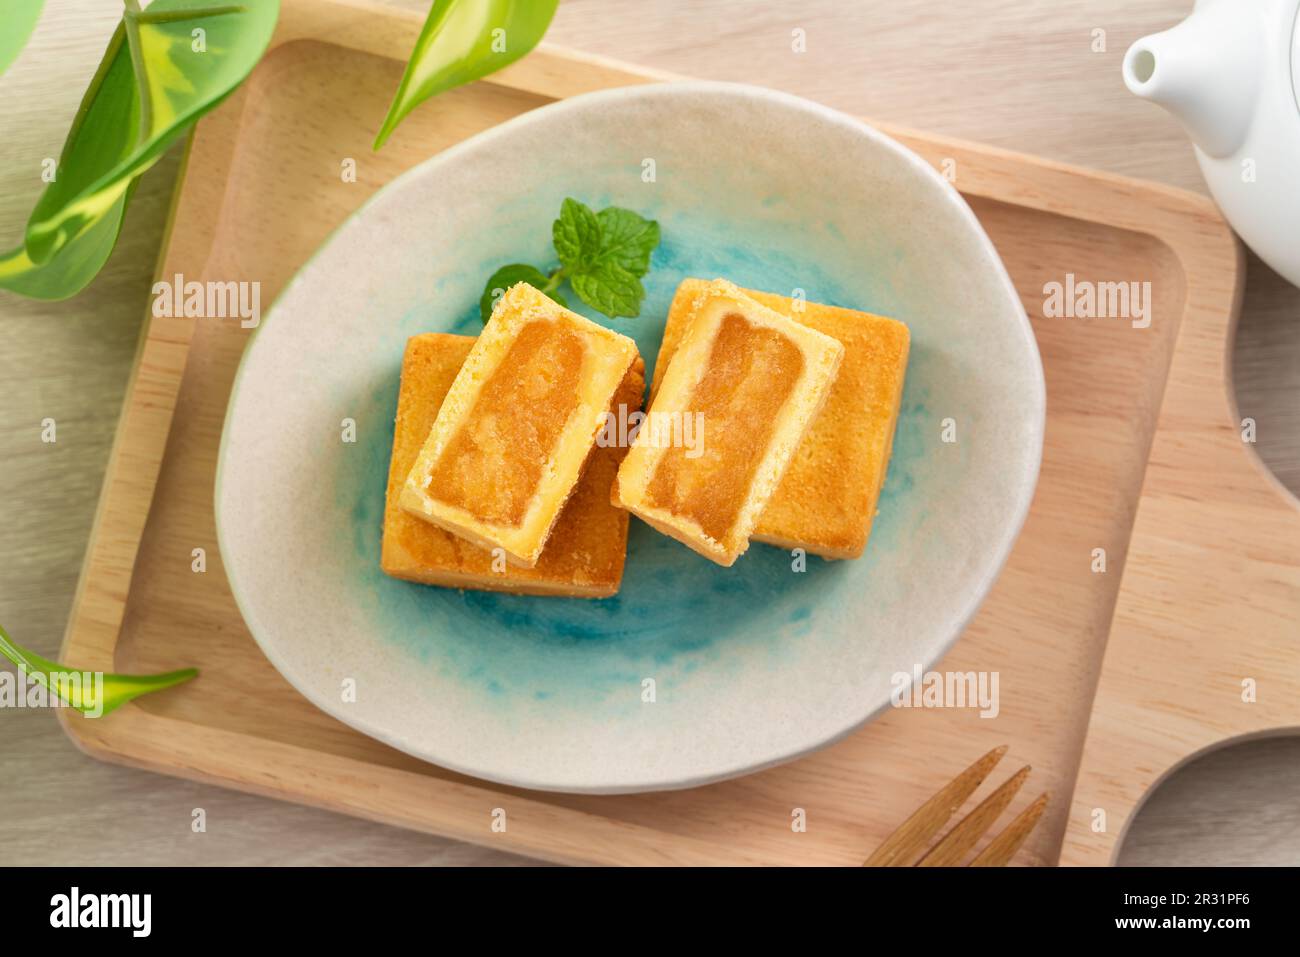 Delicious Taiwanese famous pineapple cake pastry dessert in a plate on wooden table background with hot tea. Stock Photo